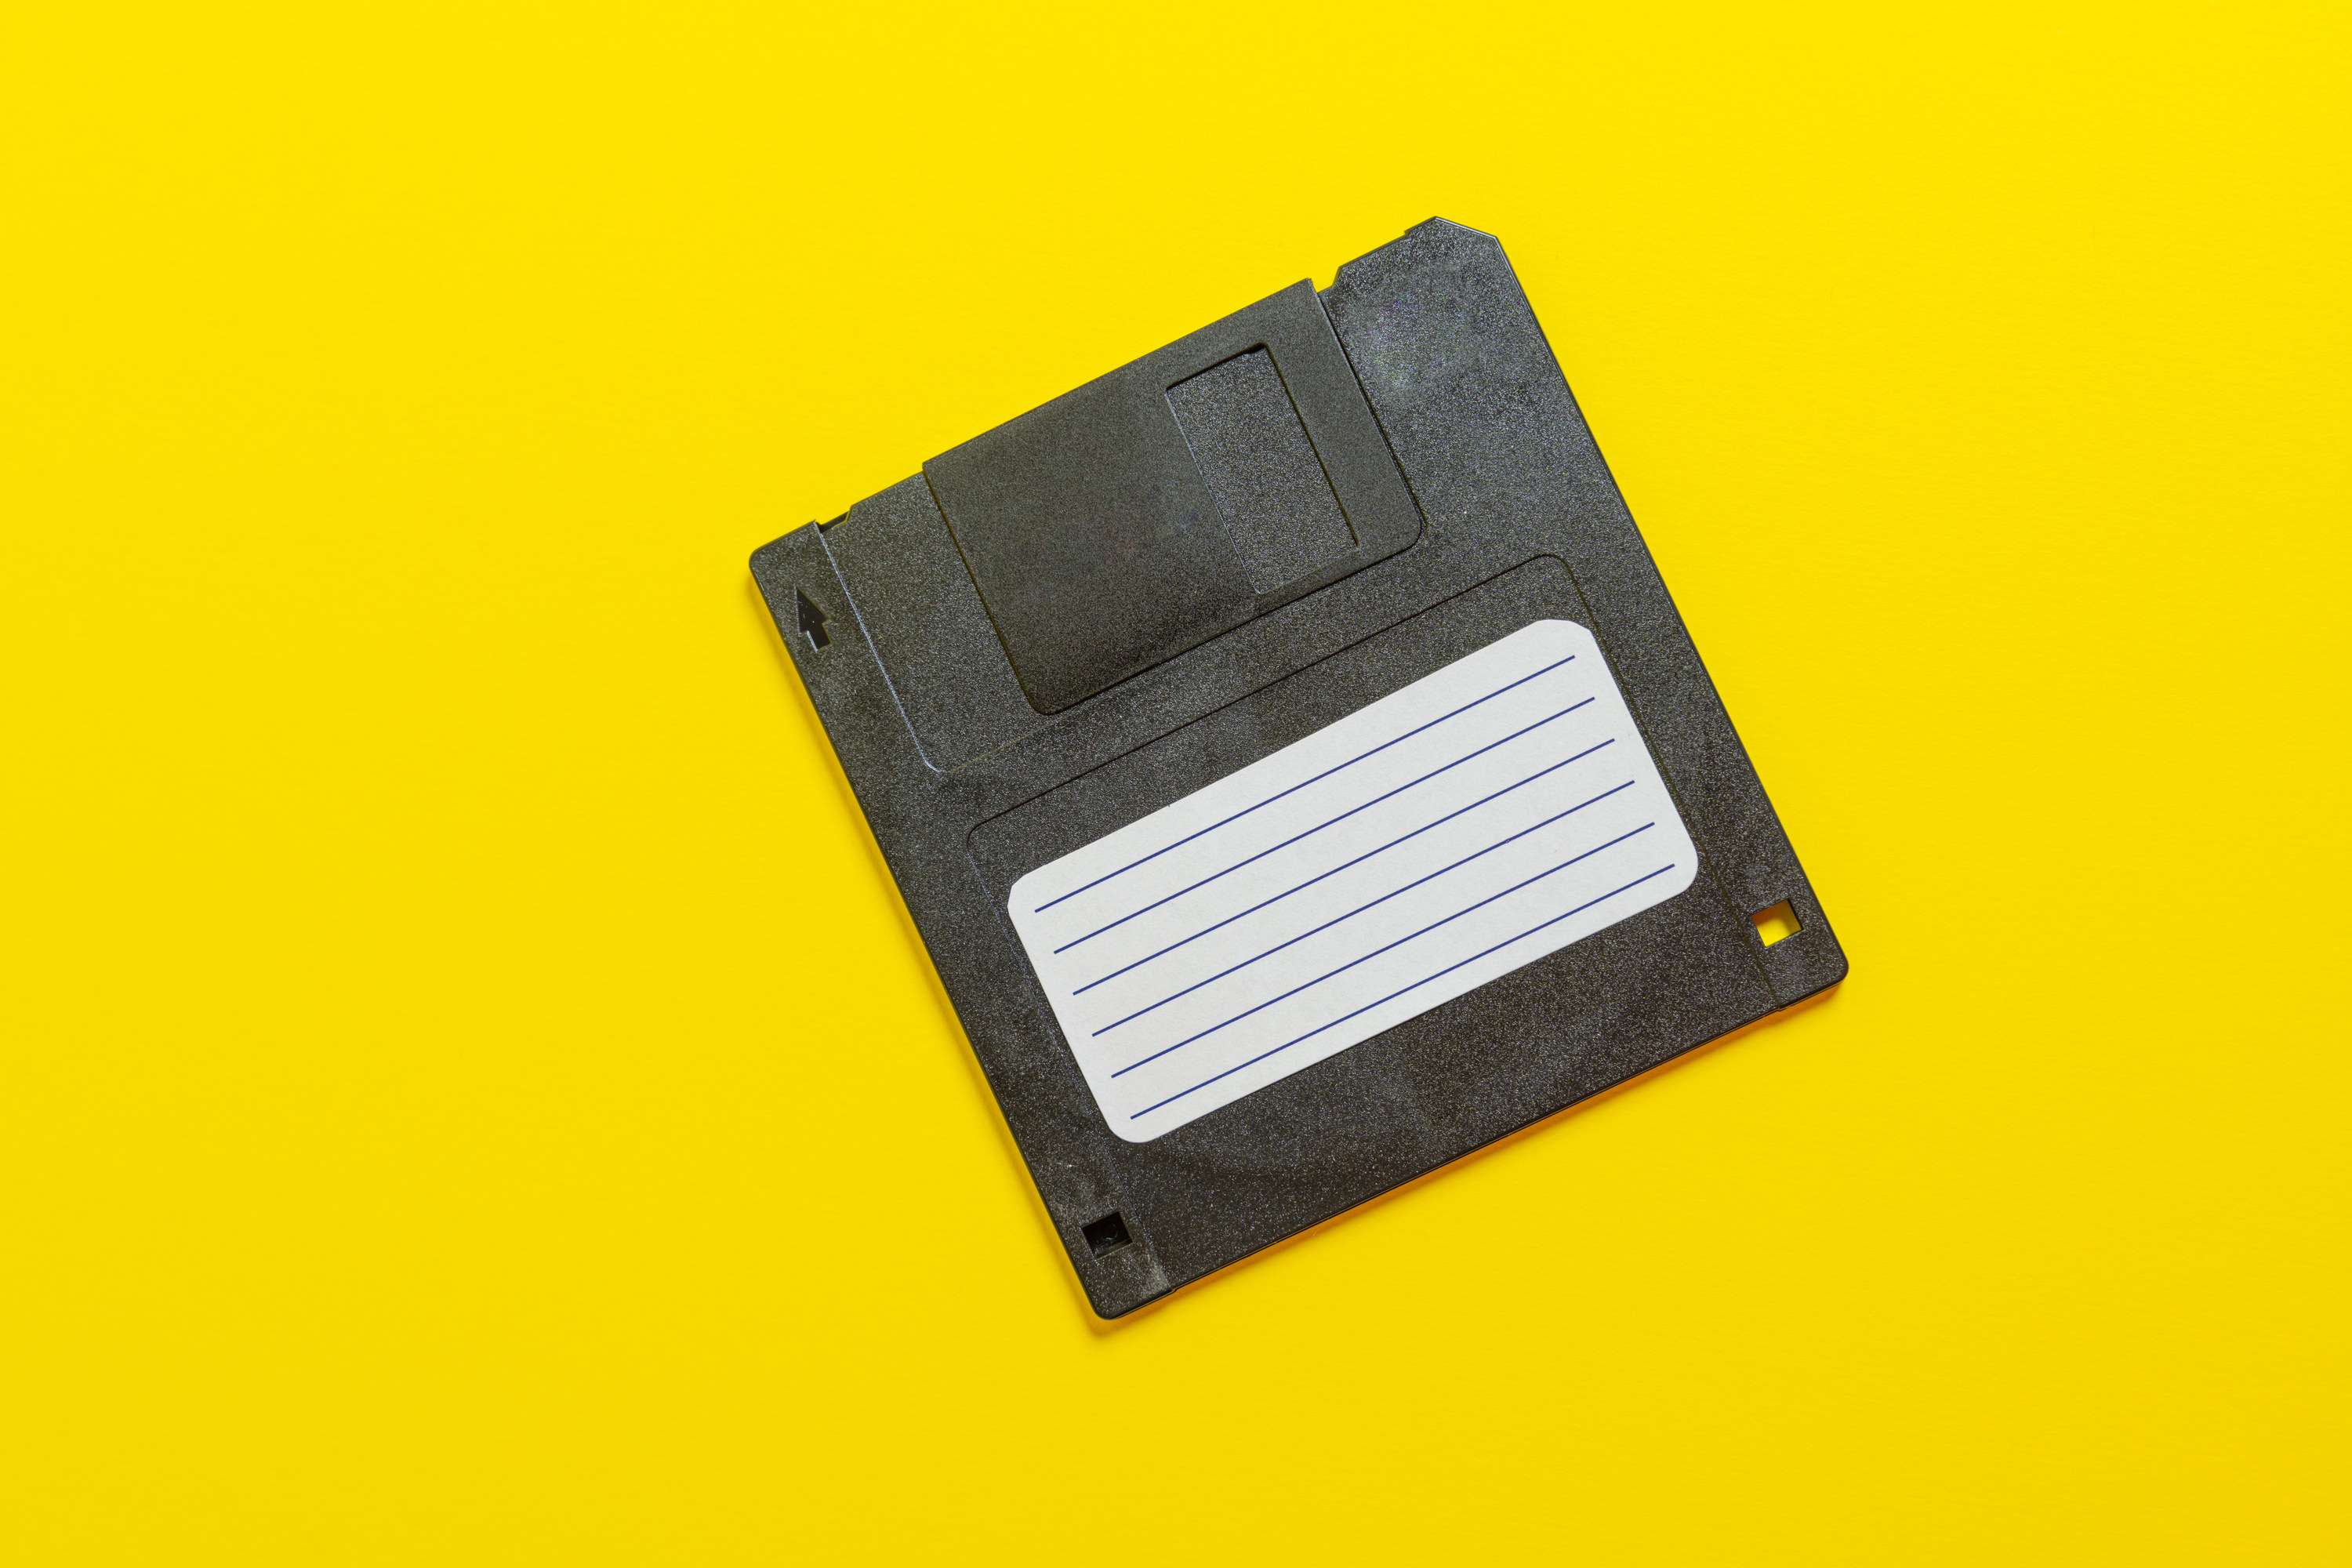 Diskette on the yellow background, symbol of data